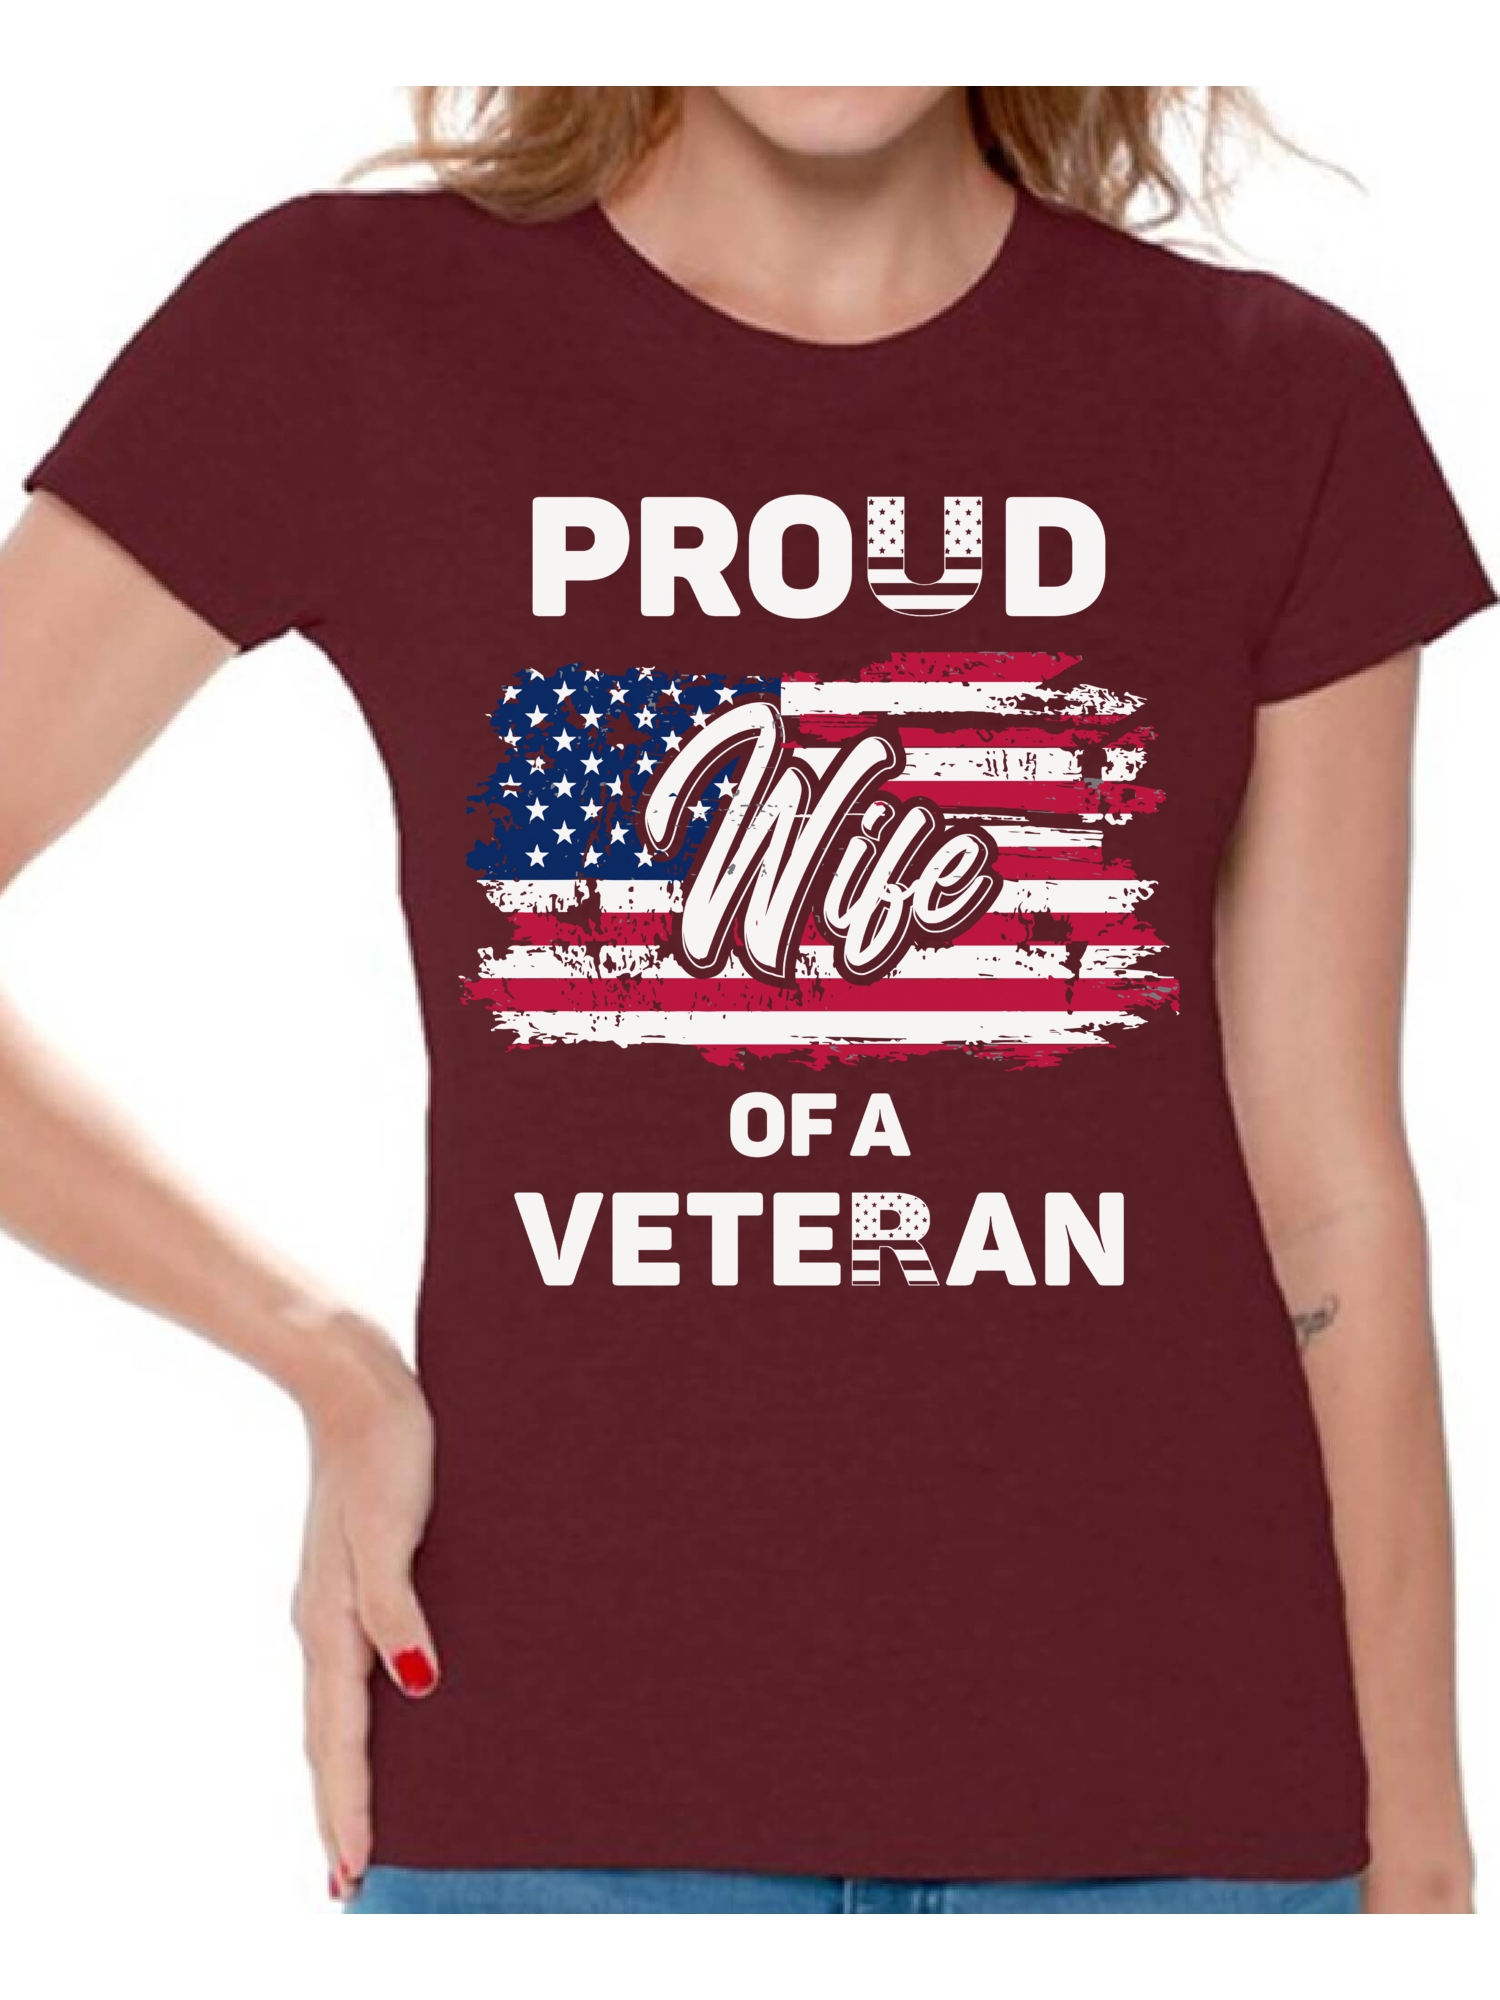 Awkward Styles Proud Wife of a Veteran Women T Shirt Veteran Clothing Collection Gifts for Wife American Army Tshirt for Women US Army Ladies Shirt Veteran Ladies Shirt American Proud Women T-Shirt - image 1 of 4